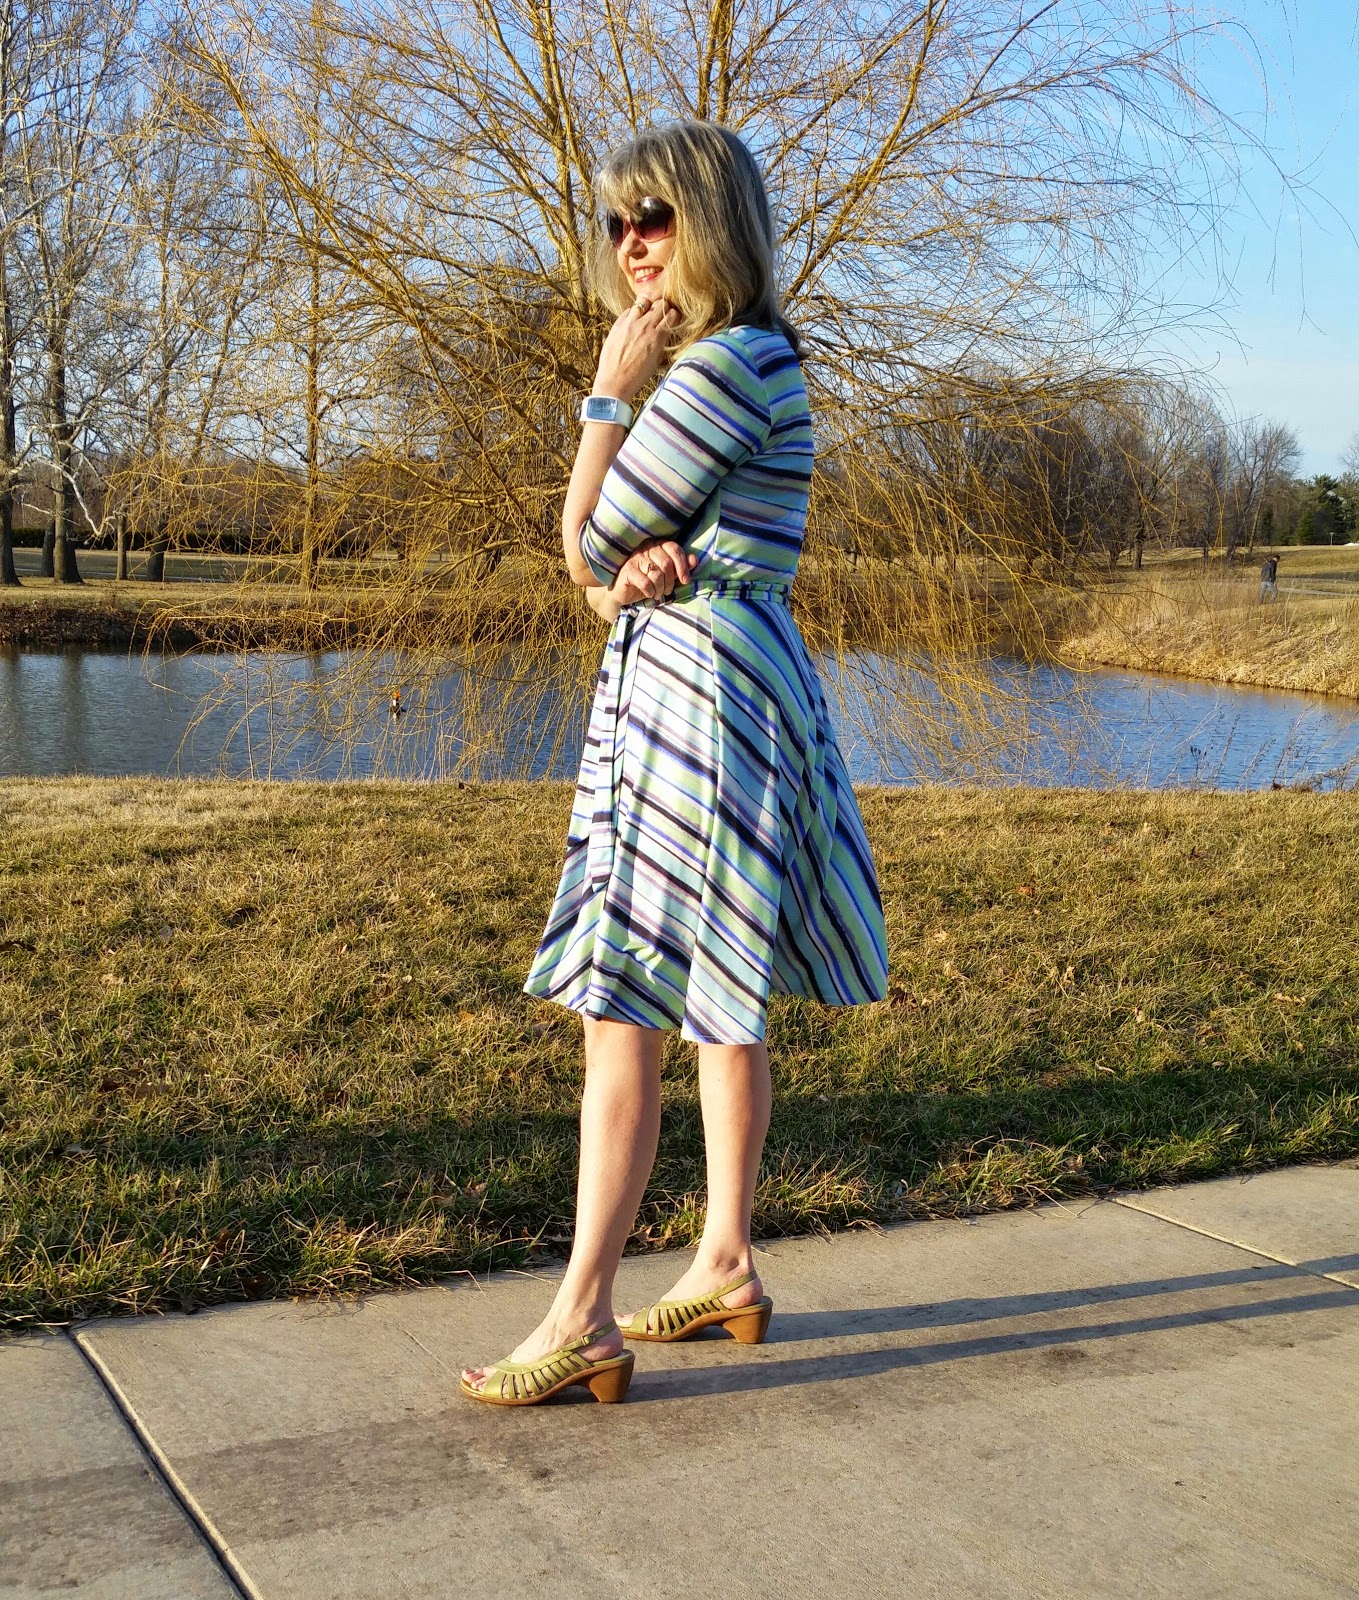 Made by a Fabricista: The Versatile Knit Wrap Dress